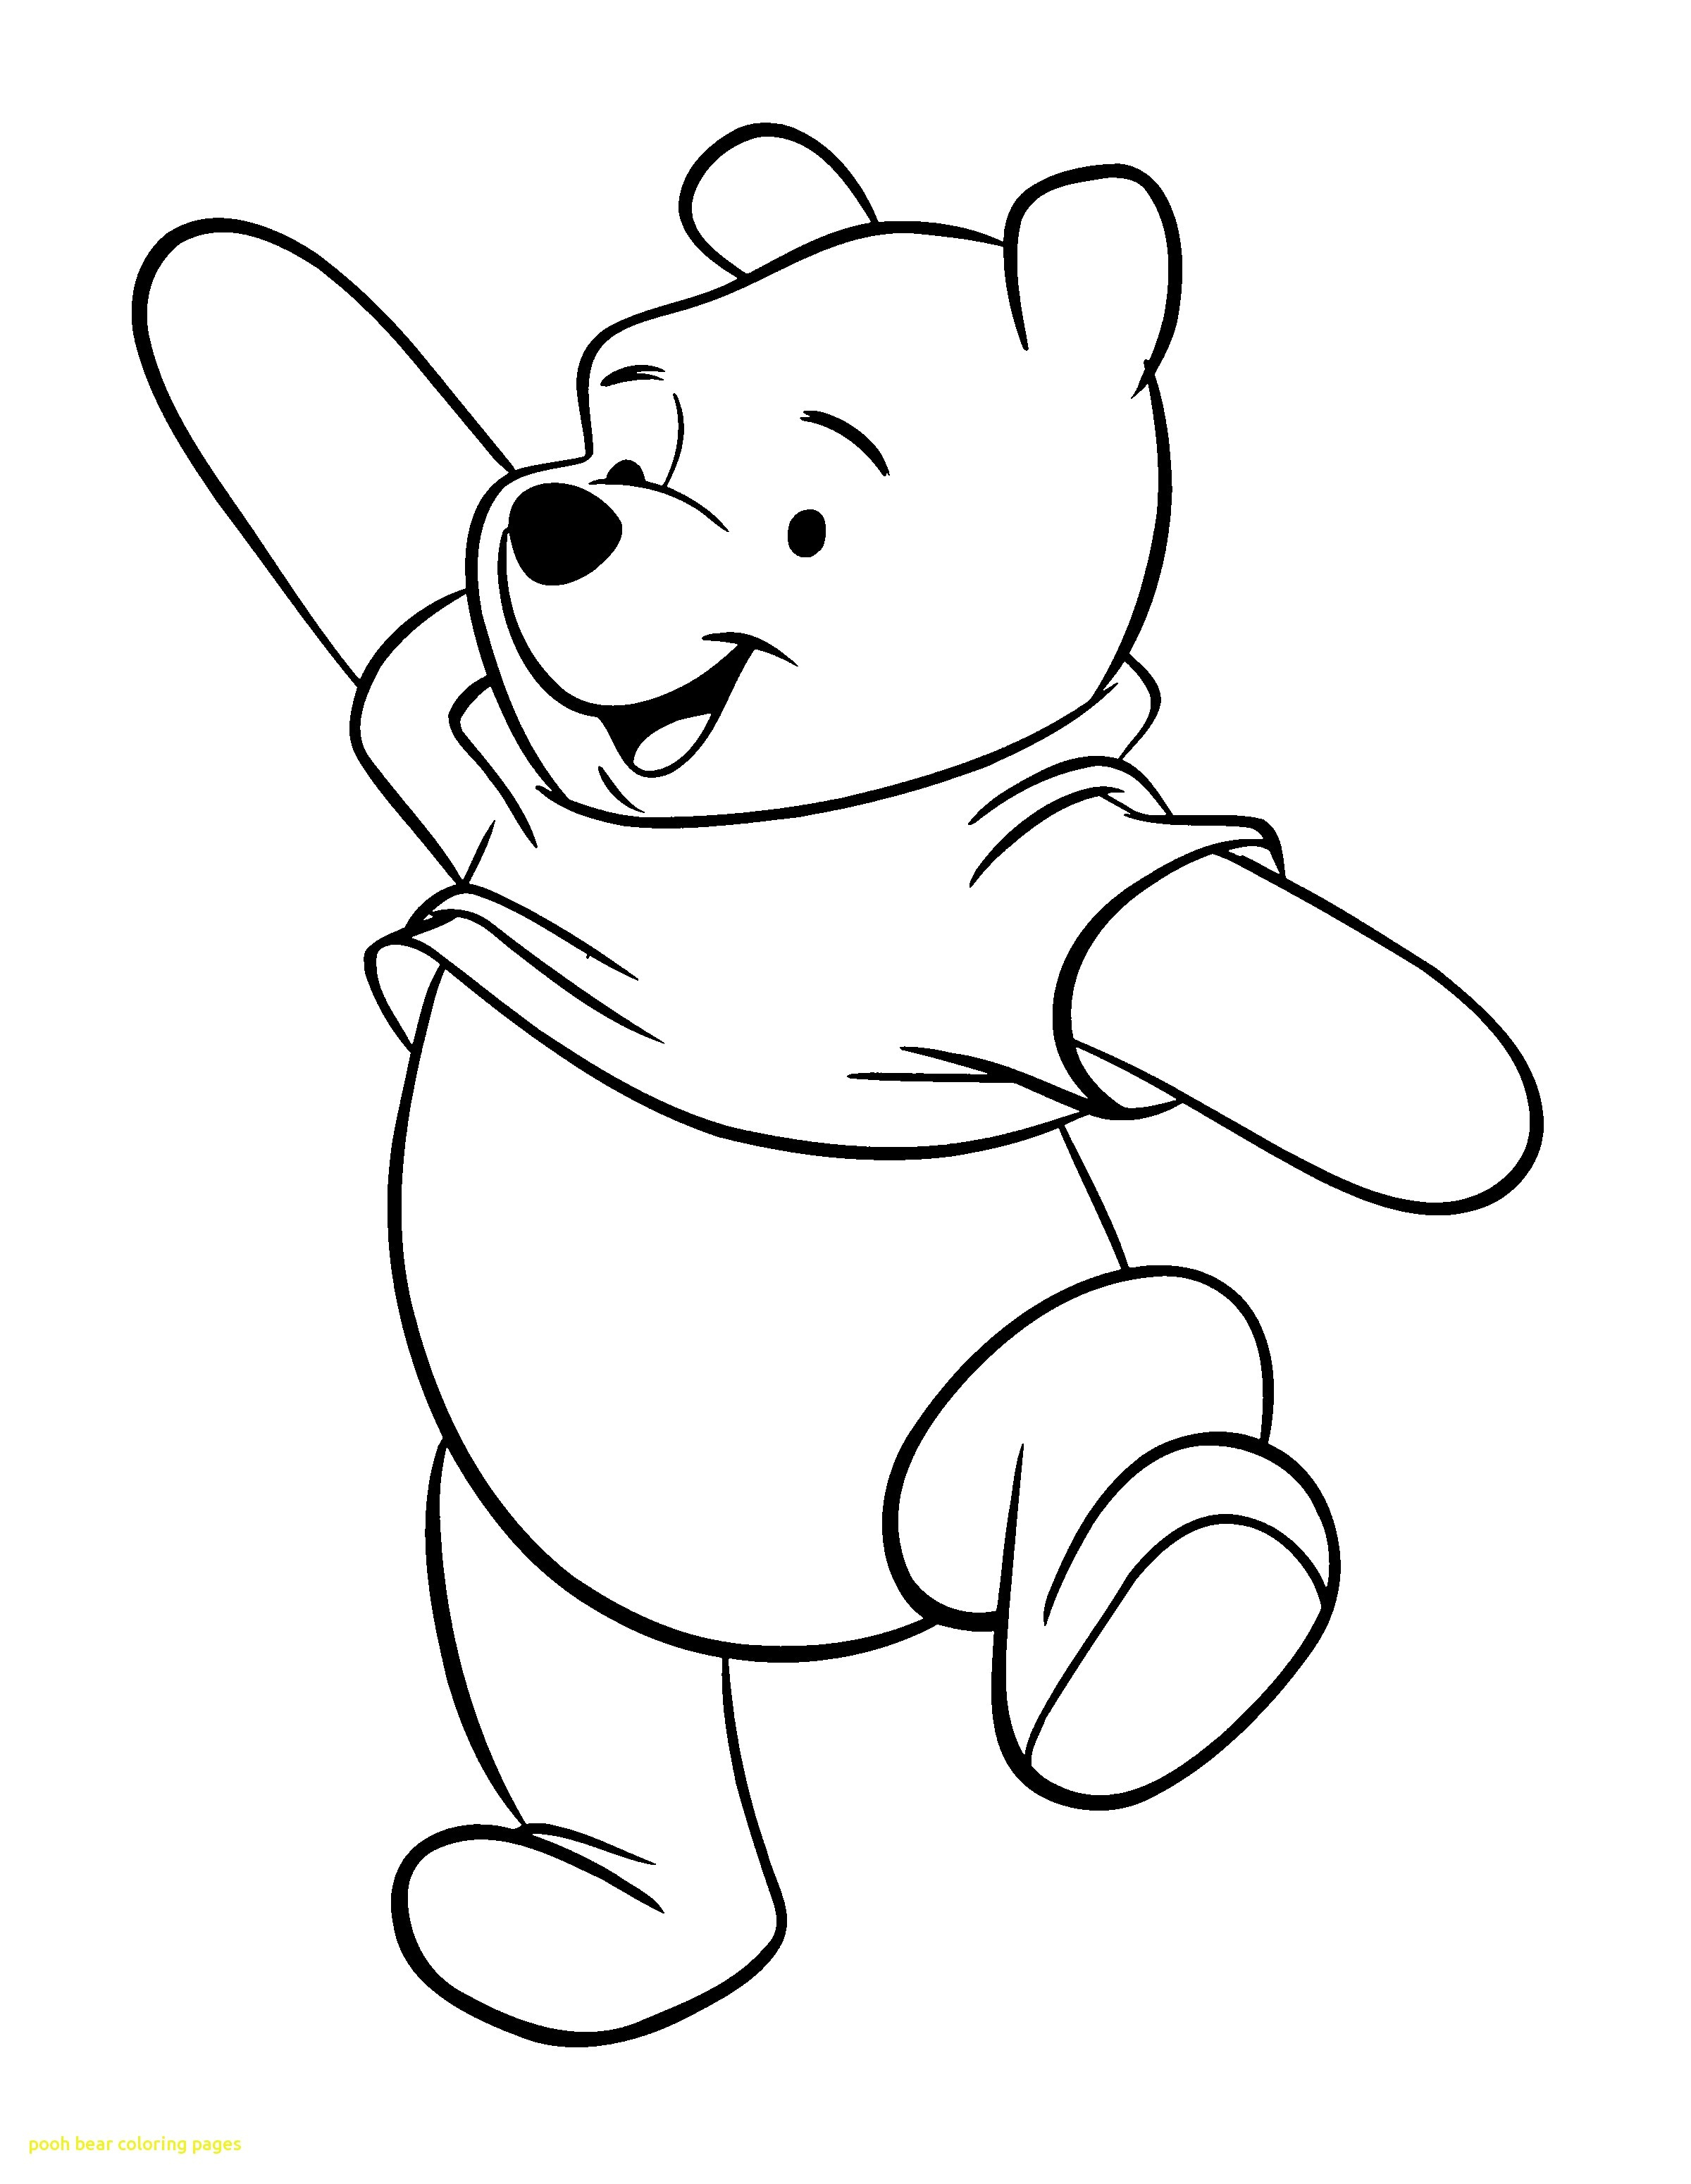 Winnie The Pooh Coloring Pages Online Luxury Pooh Bear Coloring Pages For Beatiful With Winnie The Ba